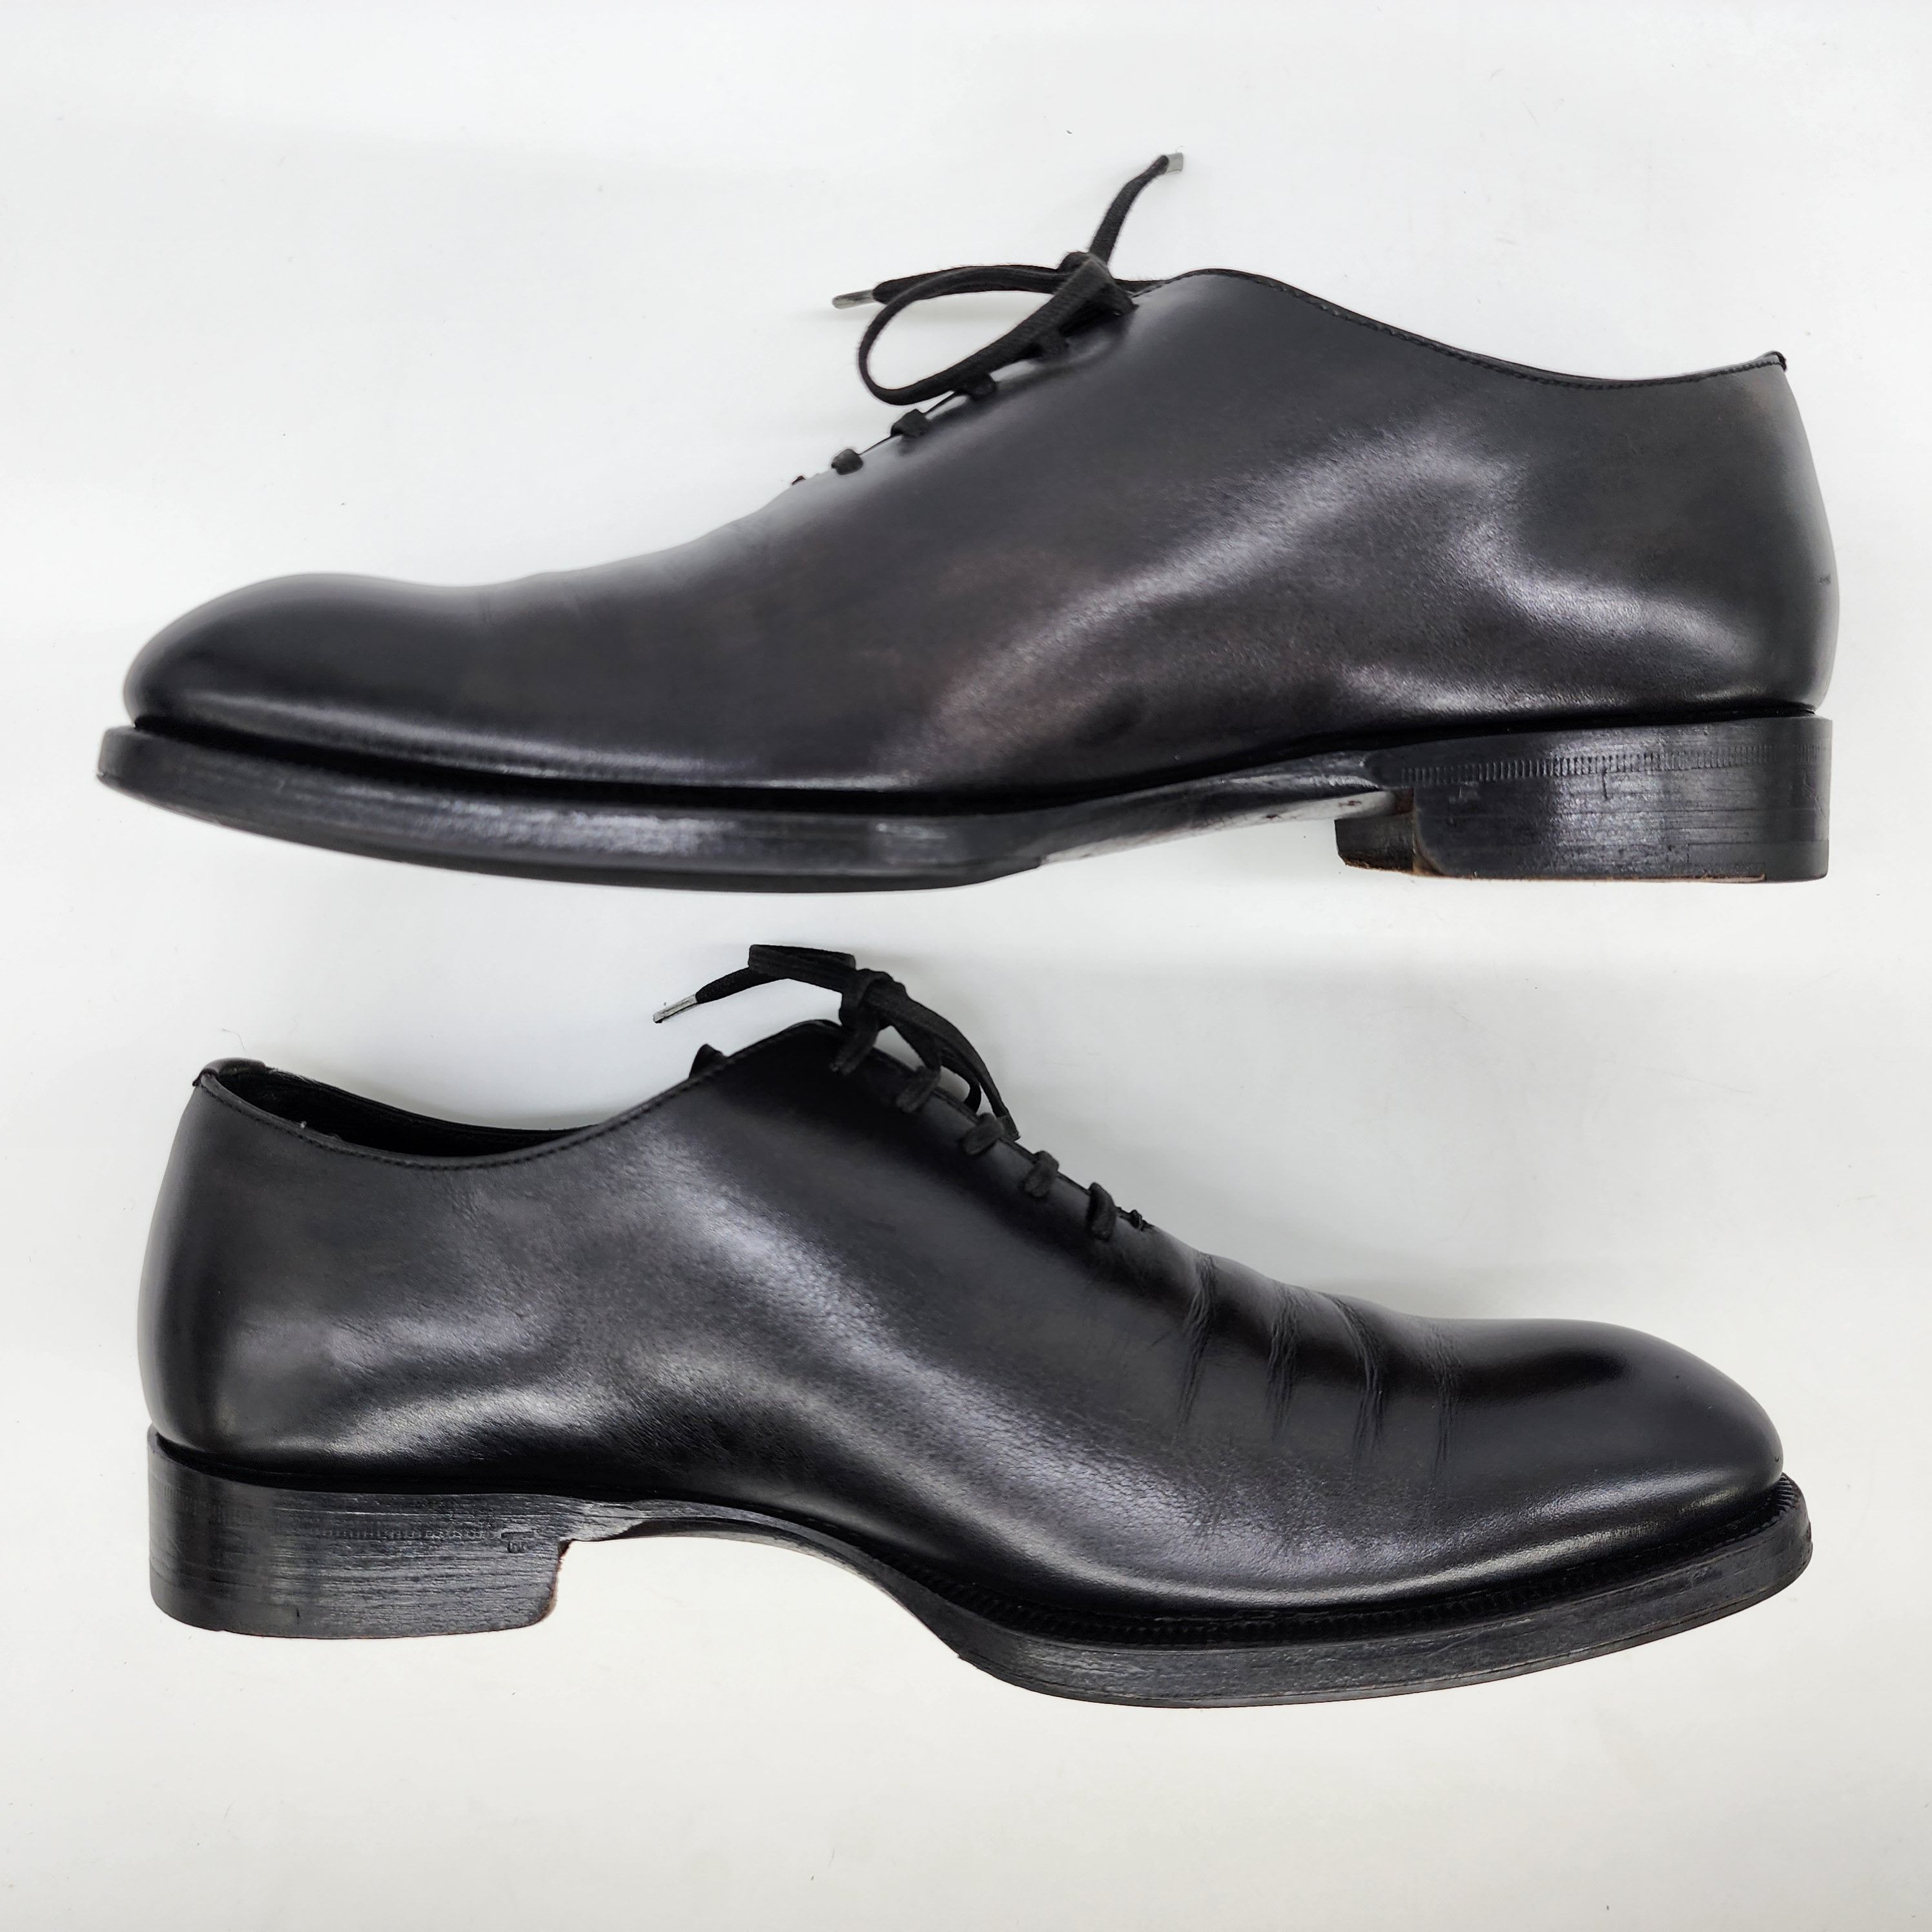 Tom Ford - Elkan Black Leather Whole-cut Oxford Shoes - 6